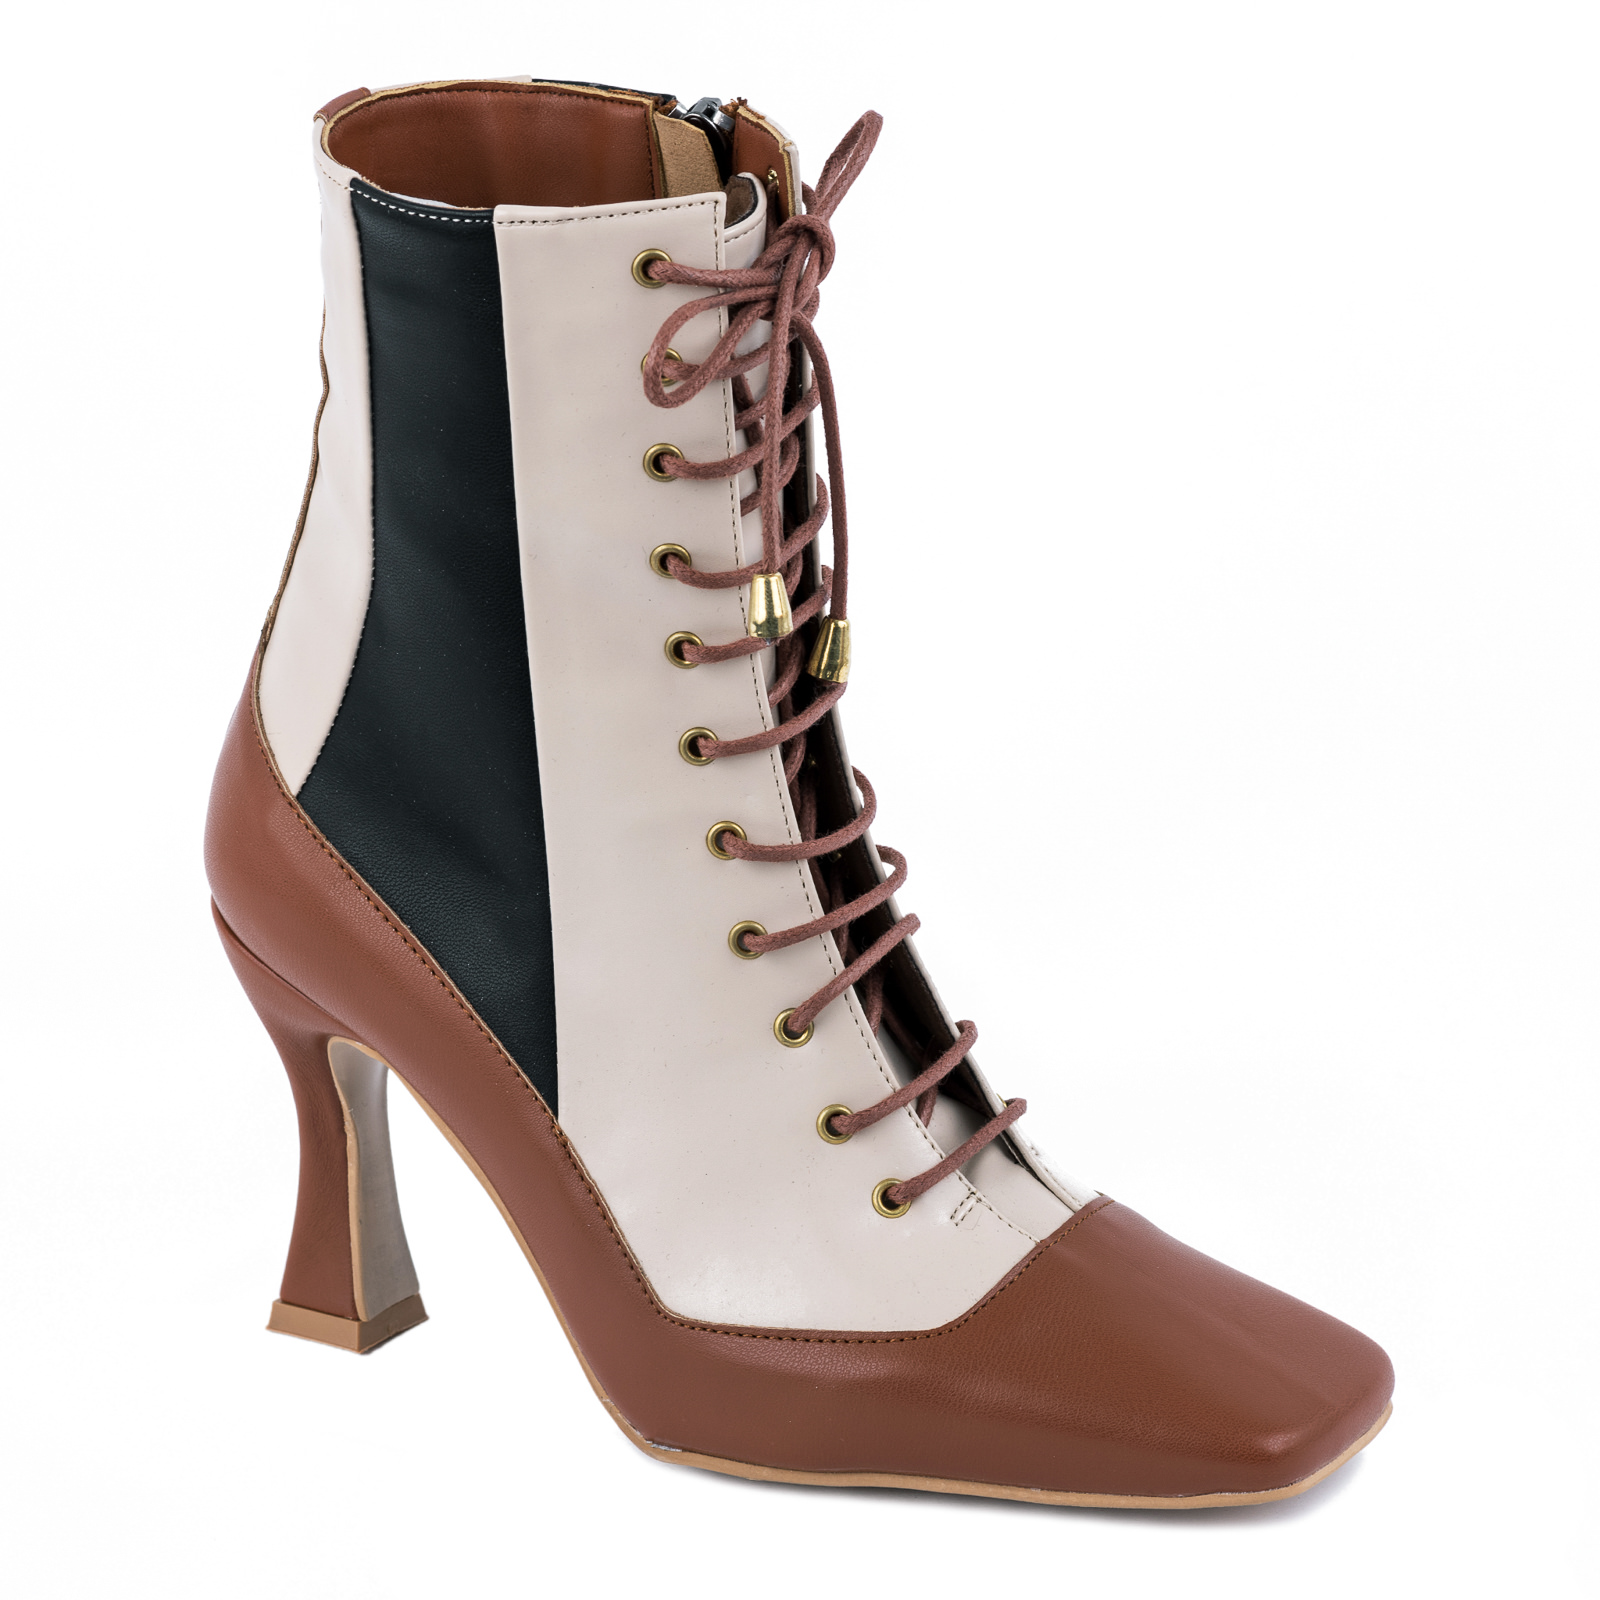 LACE UP ANKLE BOOTS WITH THIN HEEL - CAMEL/BEIGE/BLACK